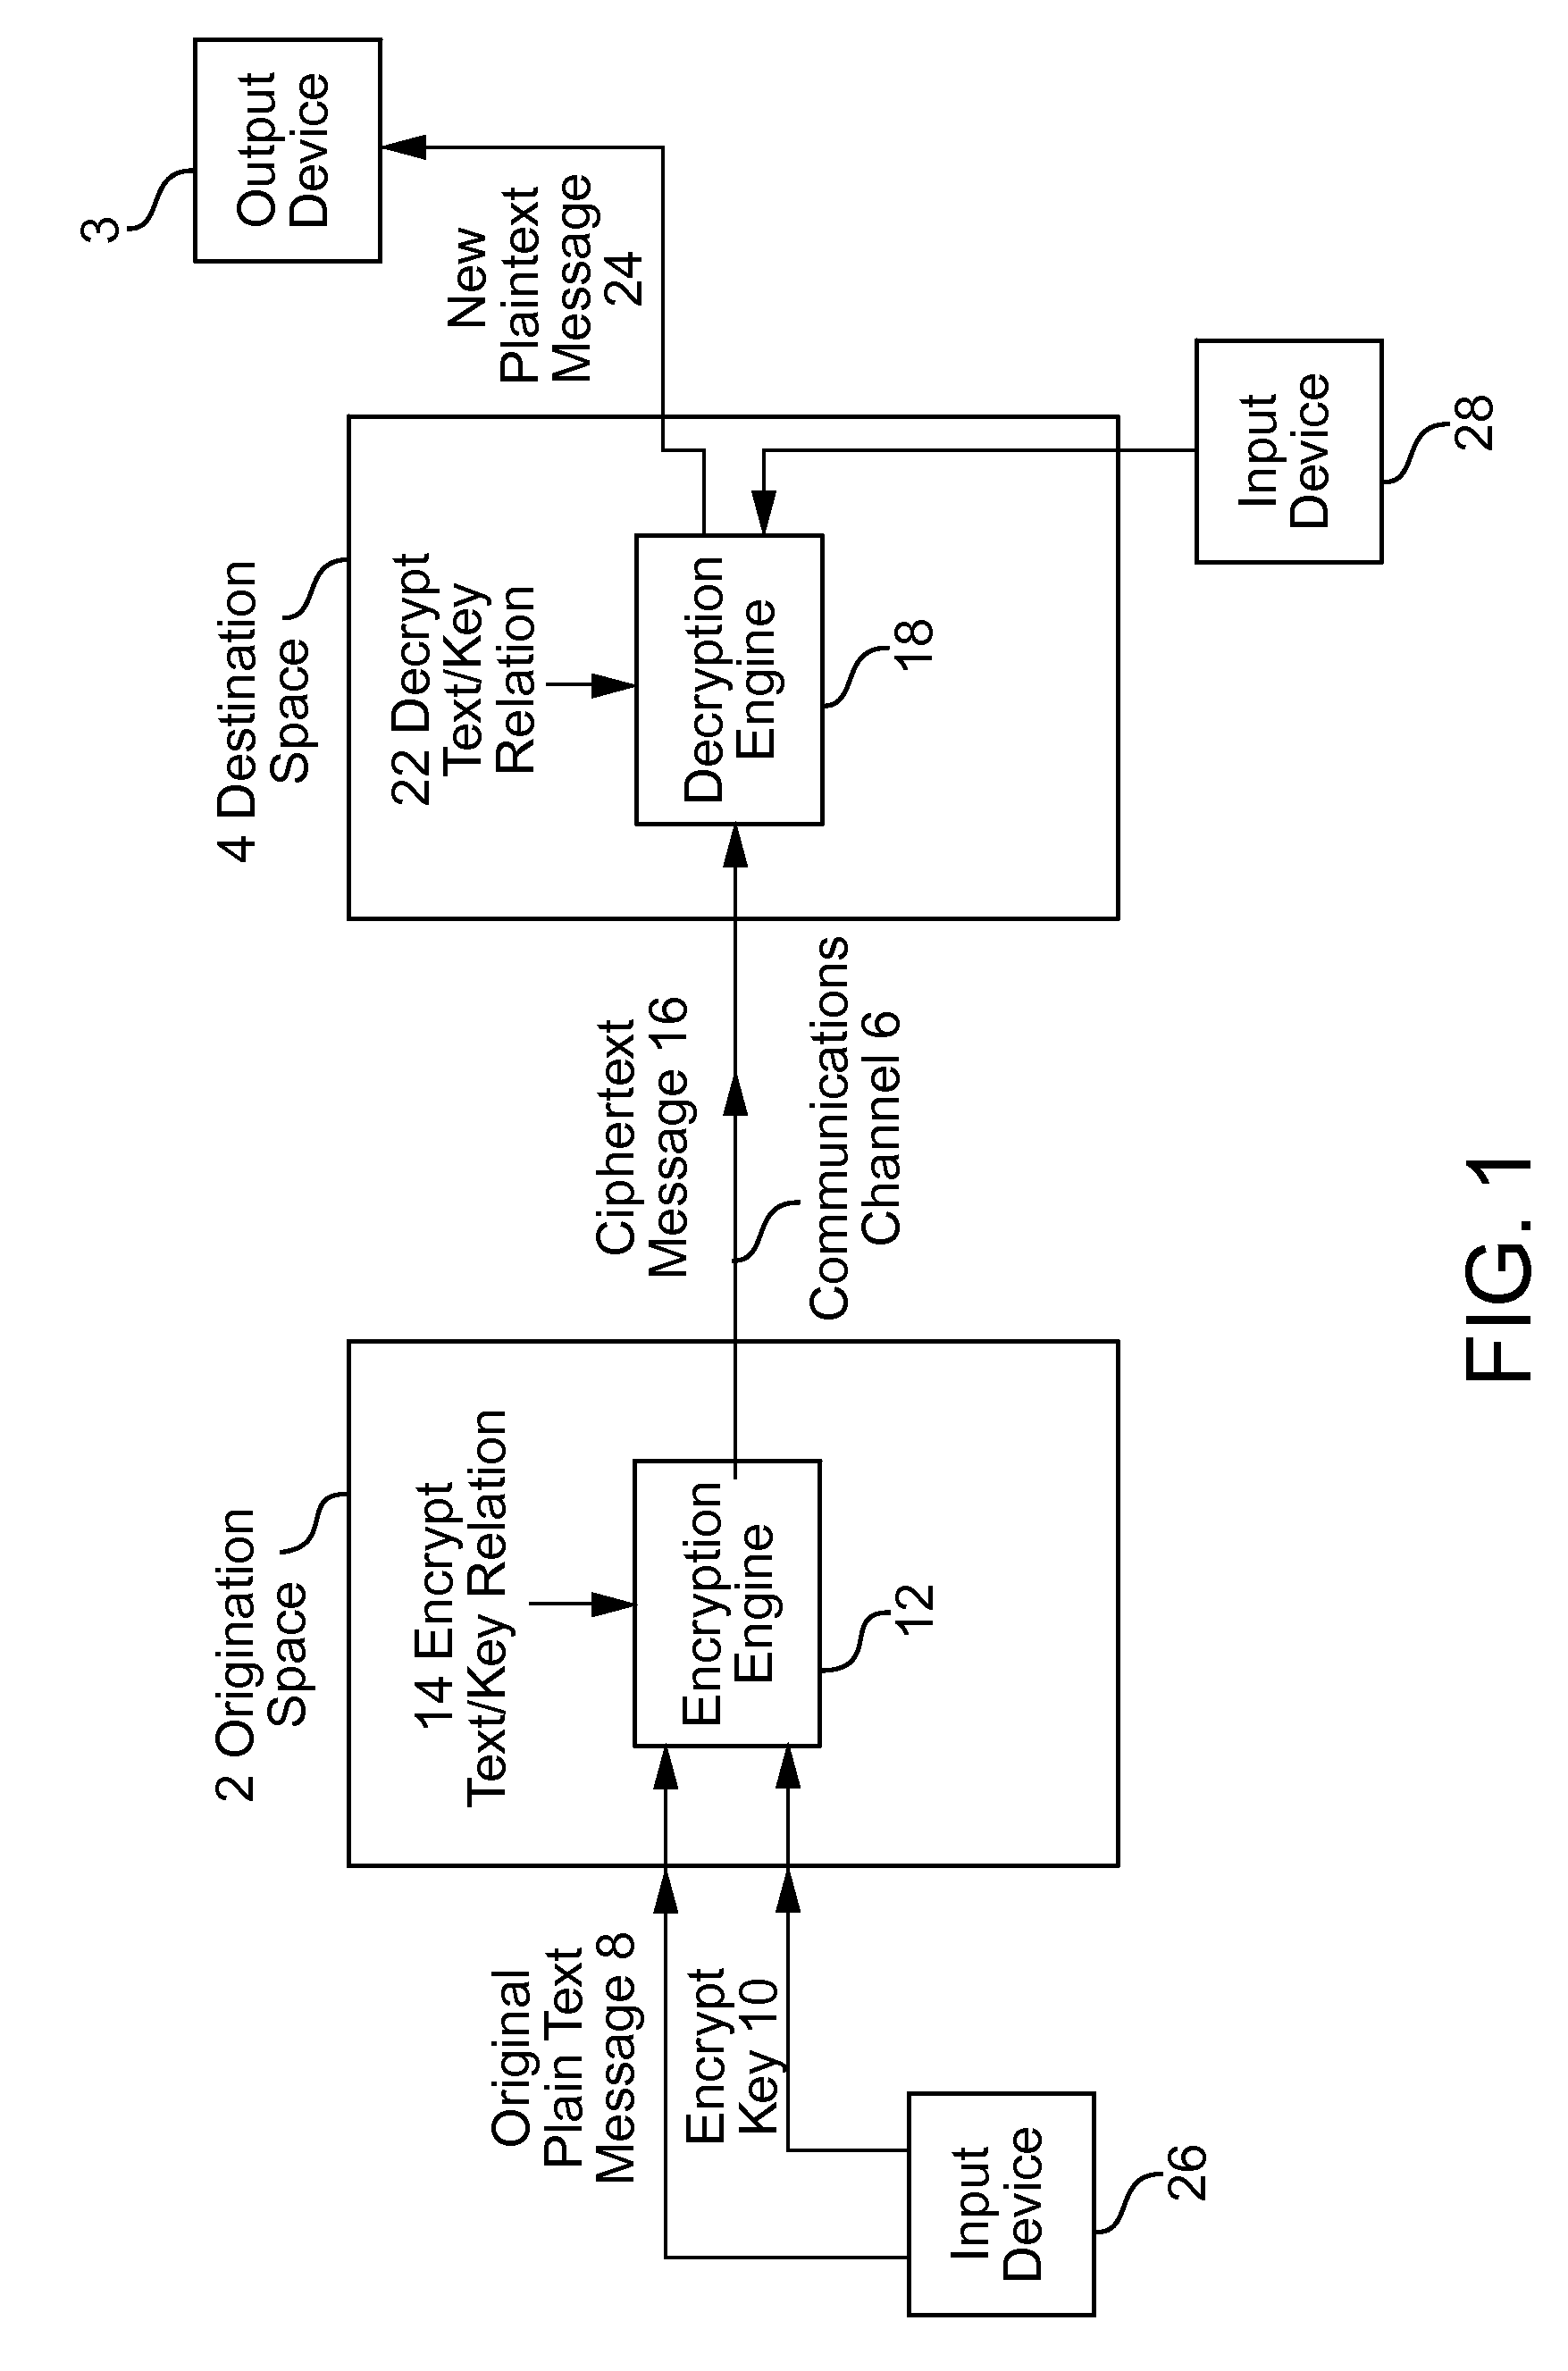 Cryptographic key split binder for use with tagged data elements